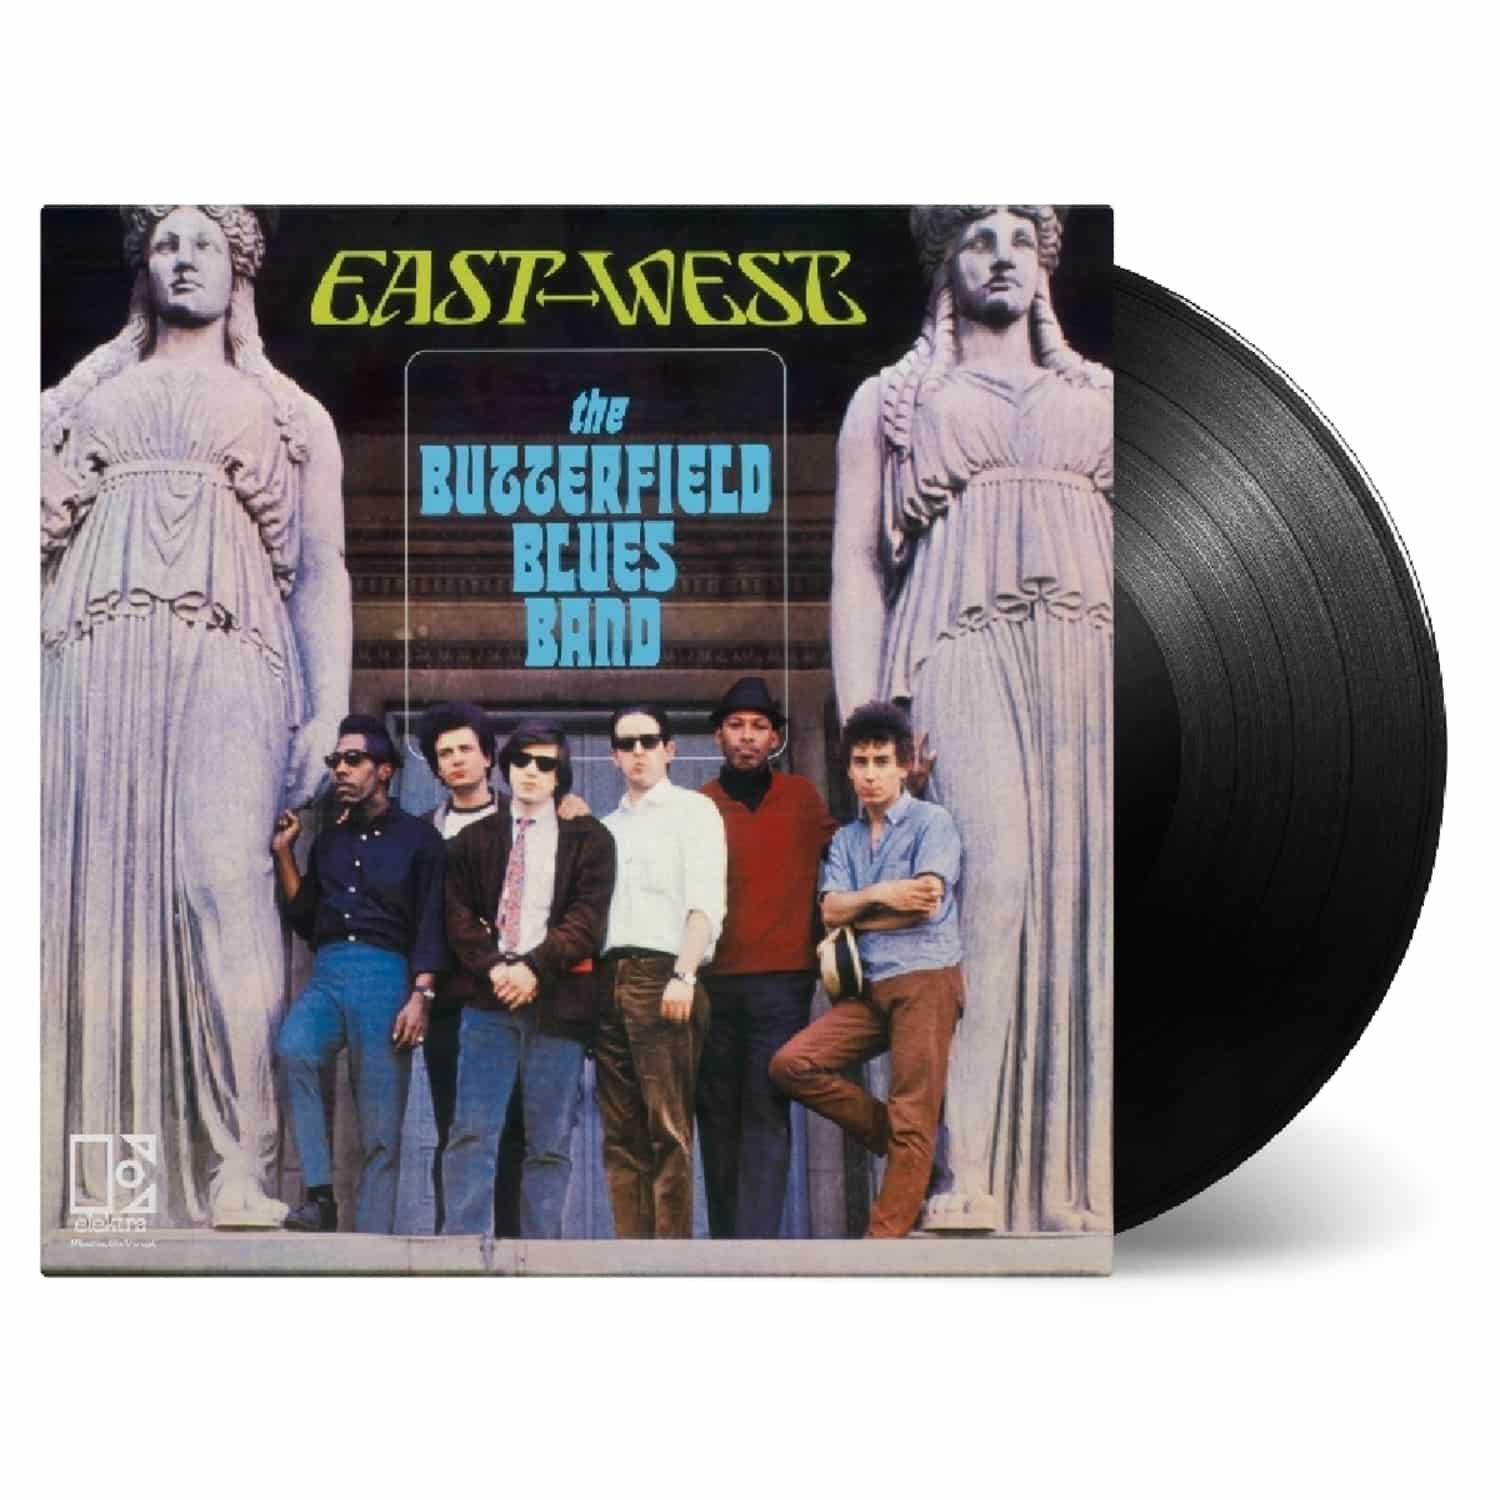 Butterfield Blues Band - EAST WEST 